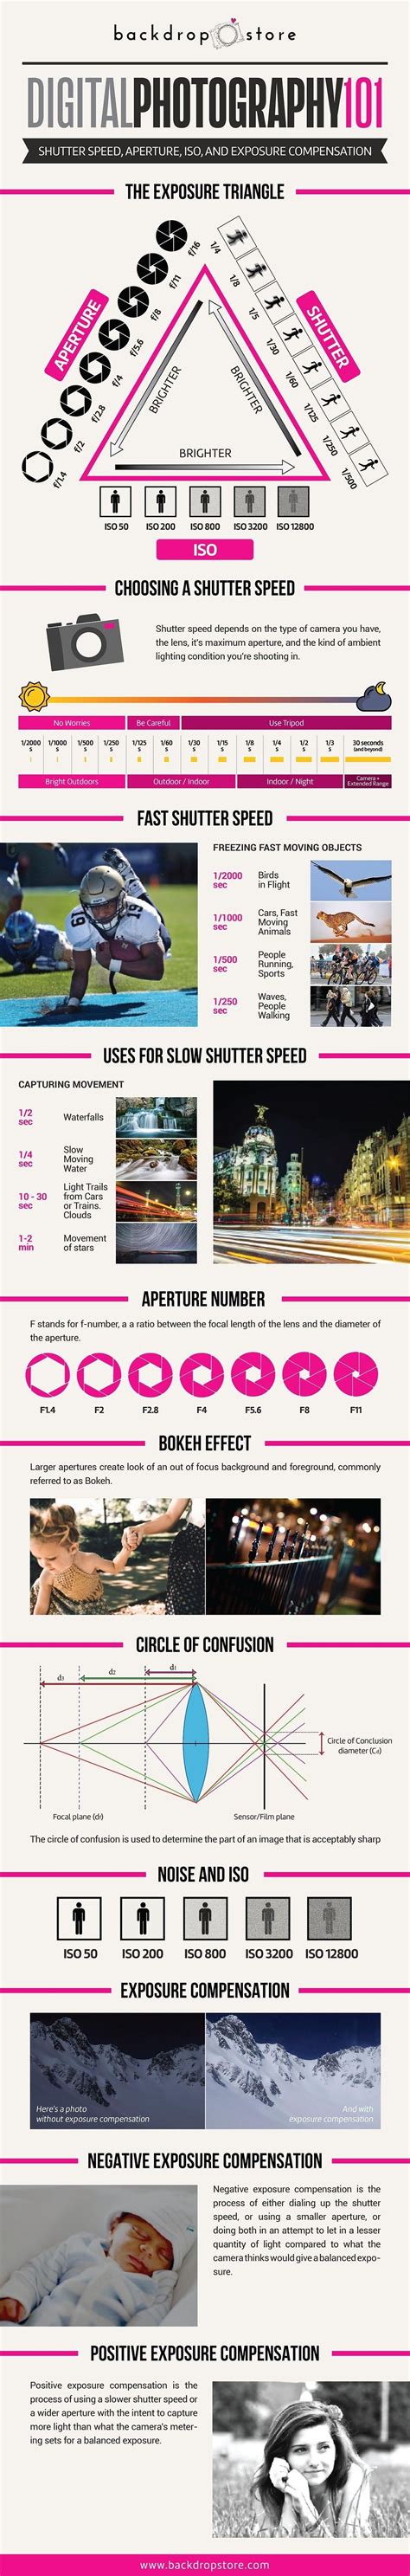 Digital Photography 101 The Exposure Triangle Infographic Digital